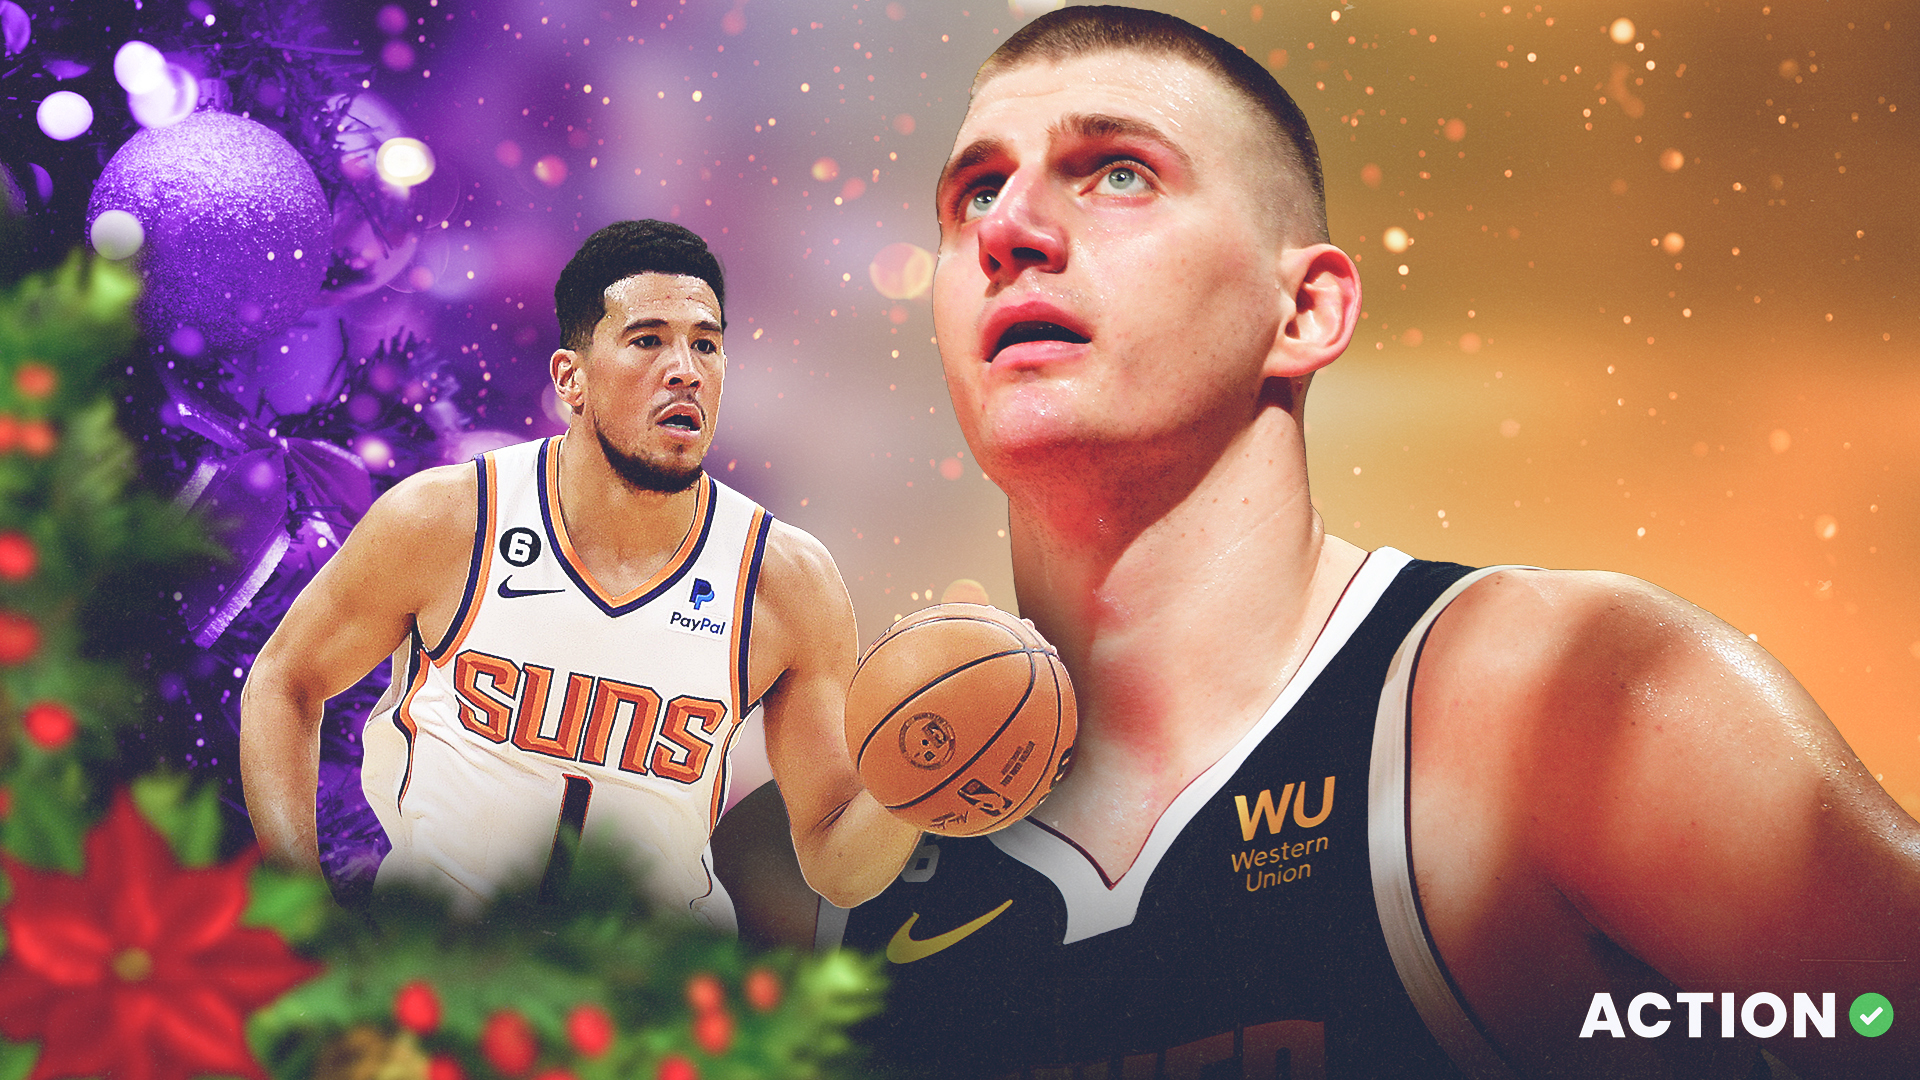 Suns vs. Nuggets Odds & Picks: Spread, Total, Player Prop & More Bets for Christmas Day Matchup article feature image